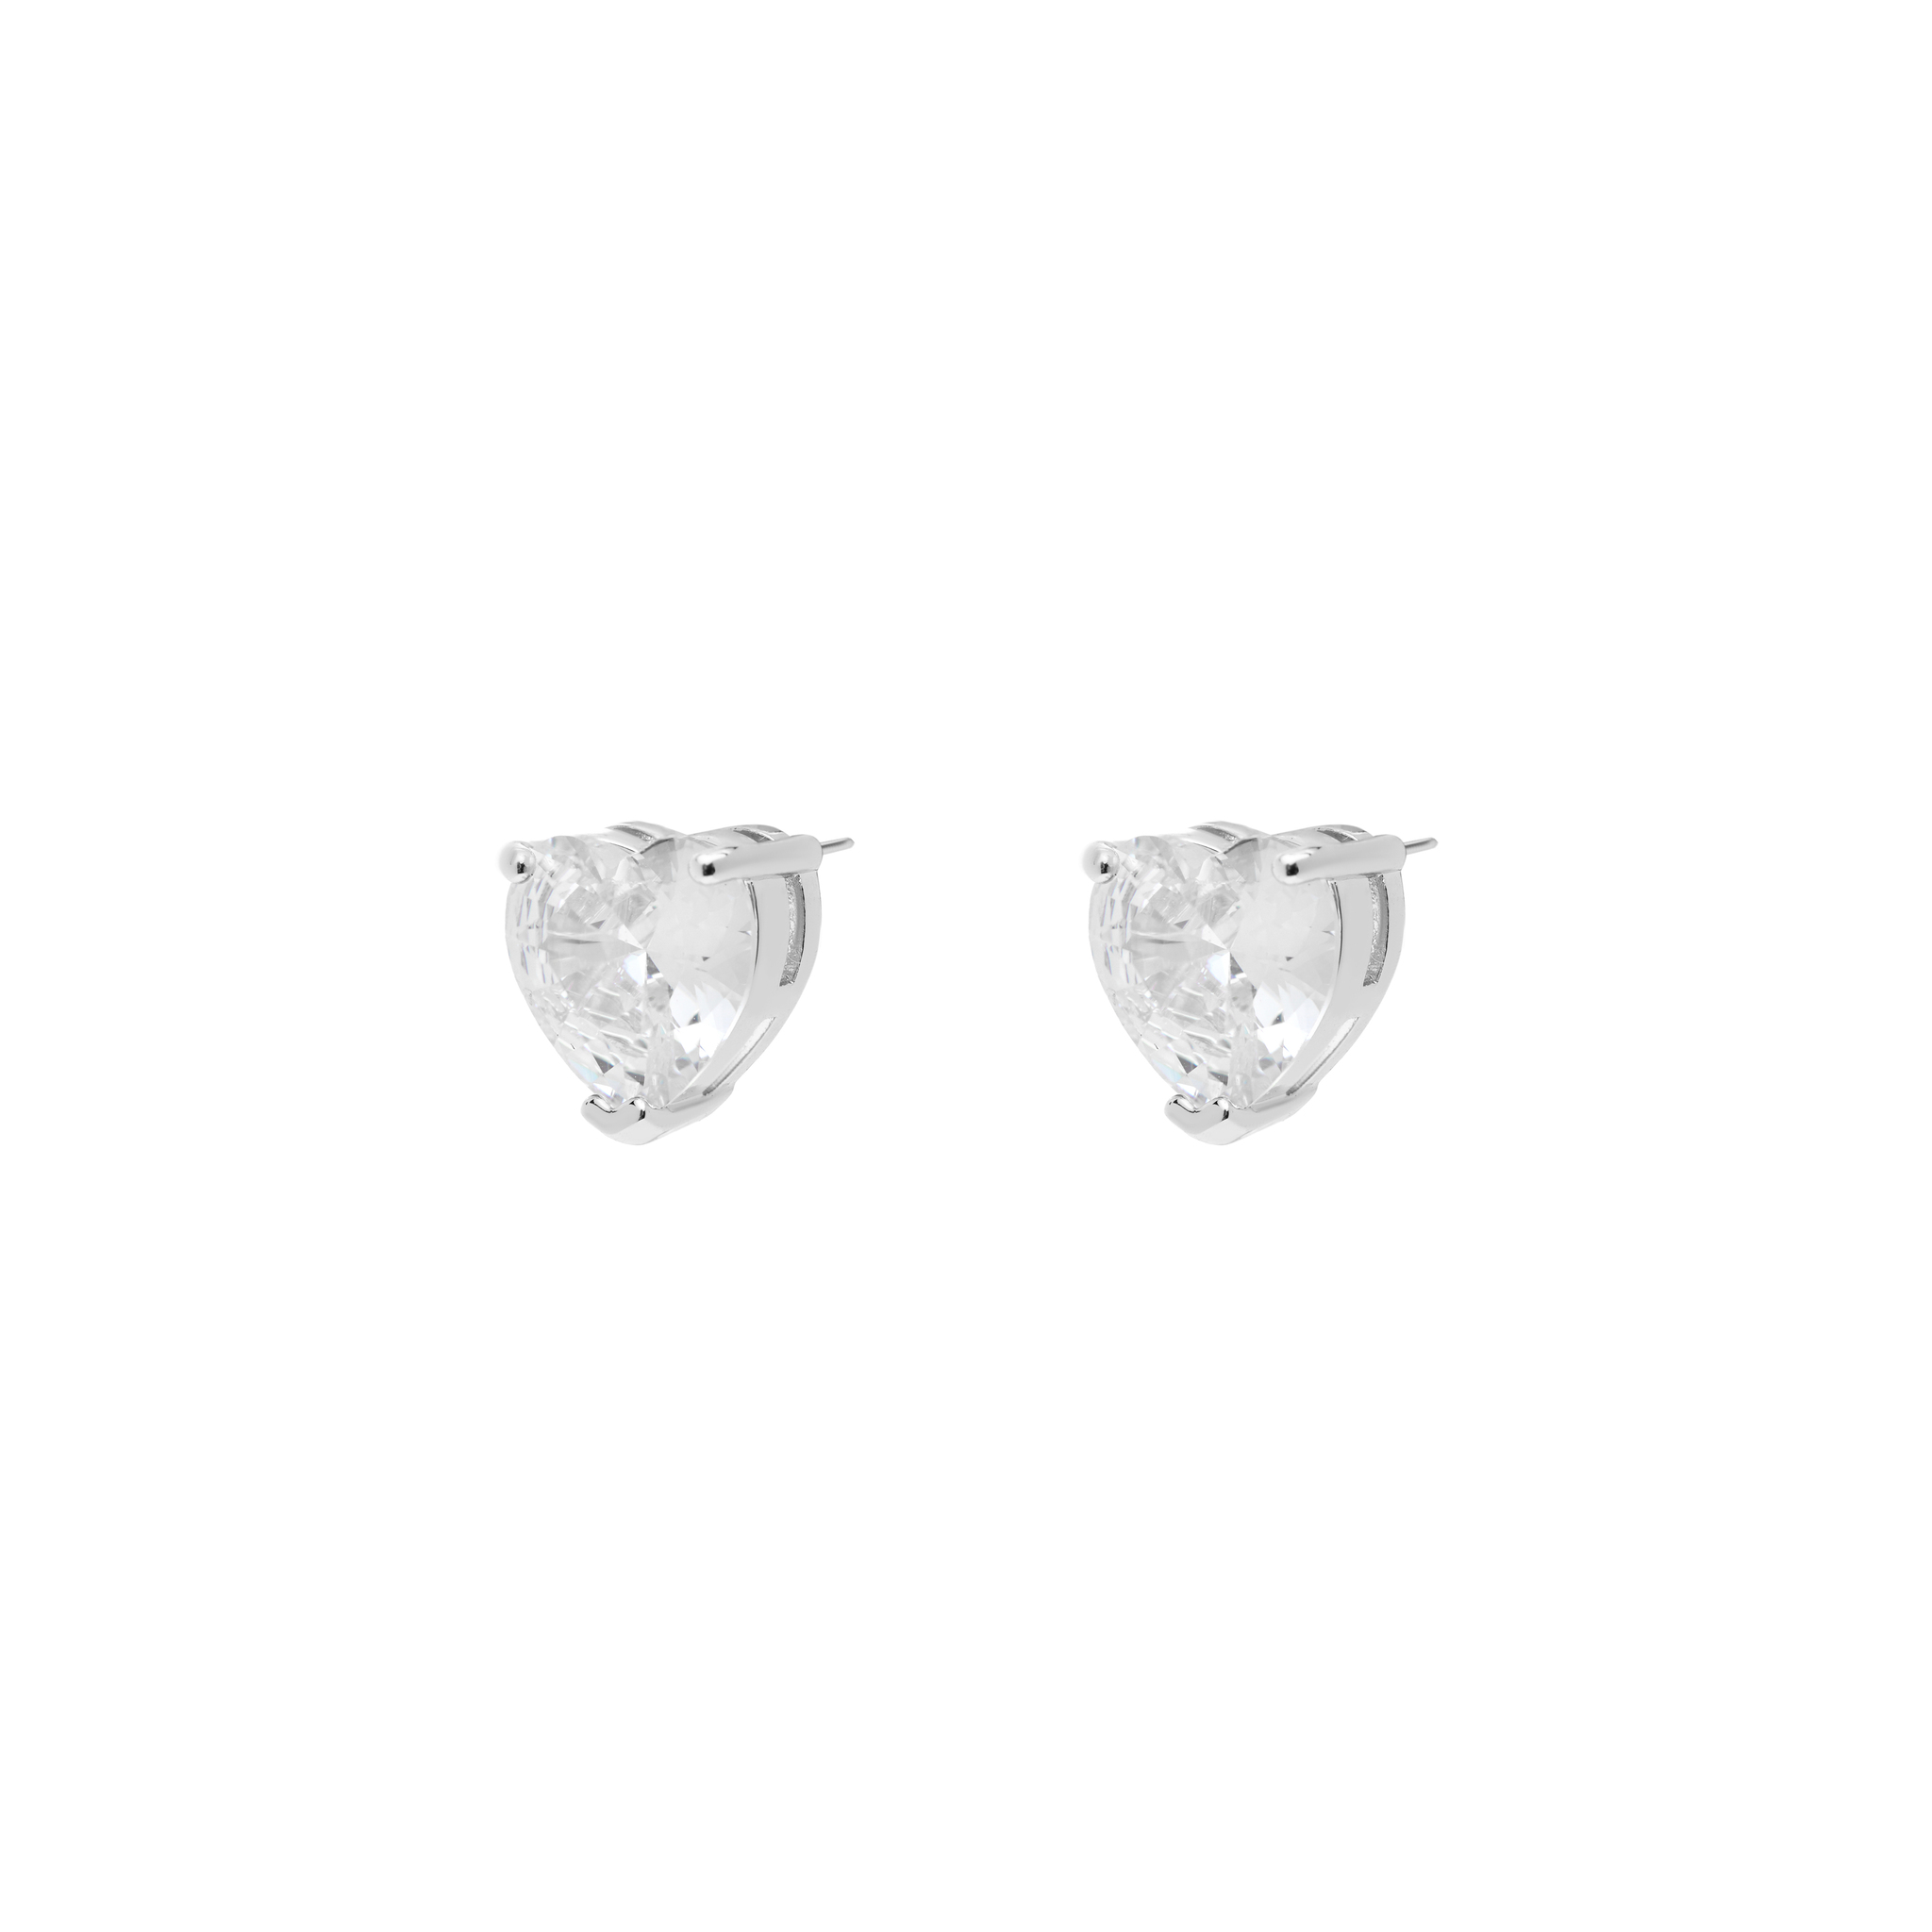 CELESTE STARRE Серьги The French Earrings – Silver celeste starre серьги the french earrings – silver